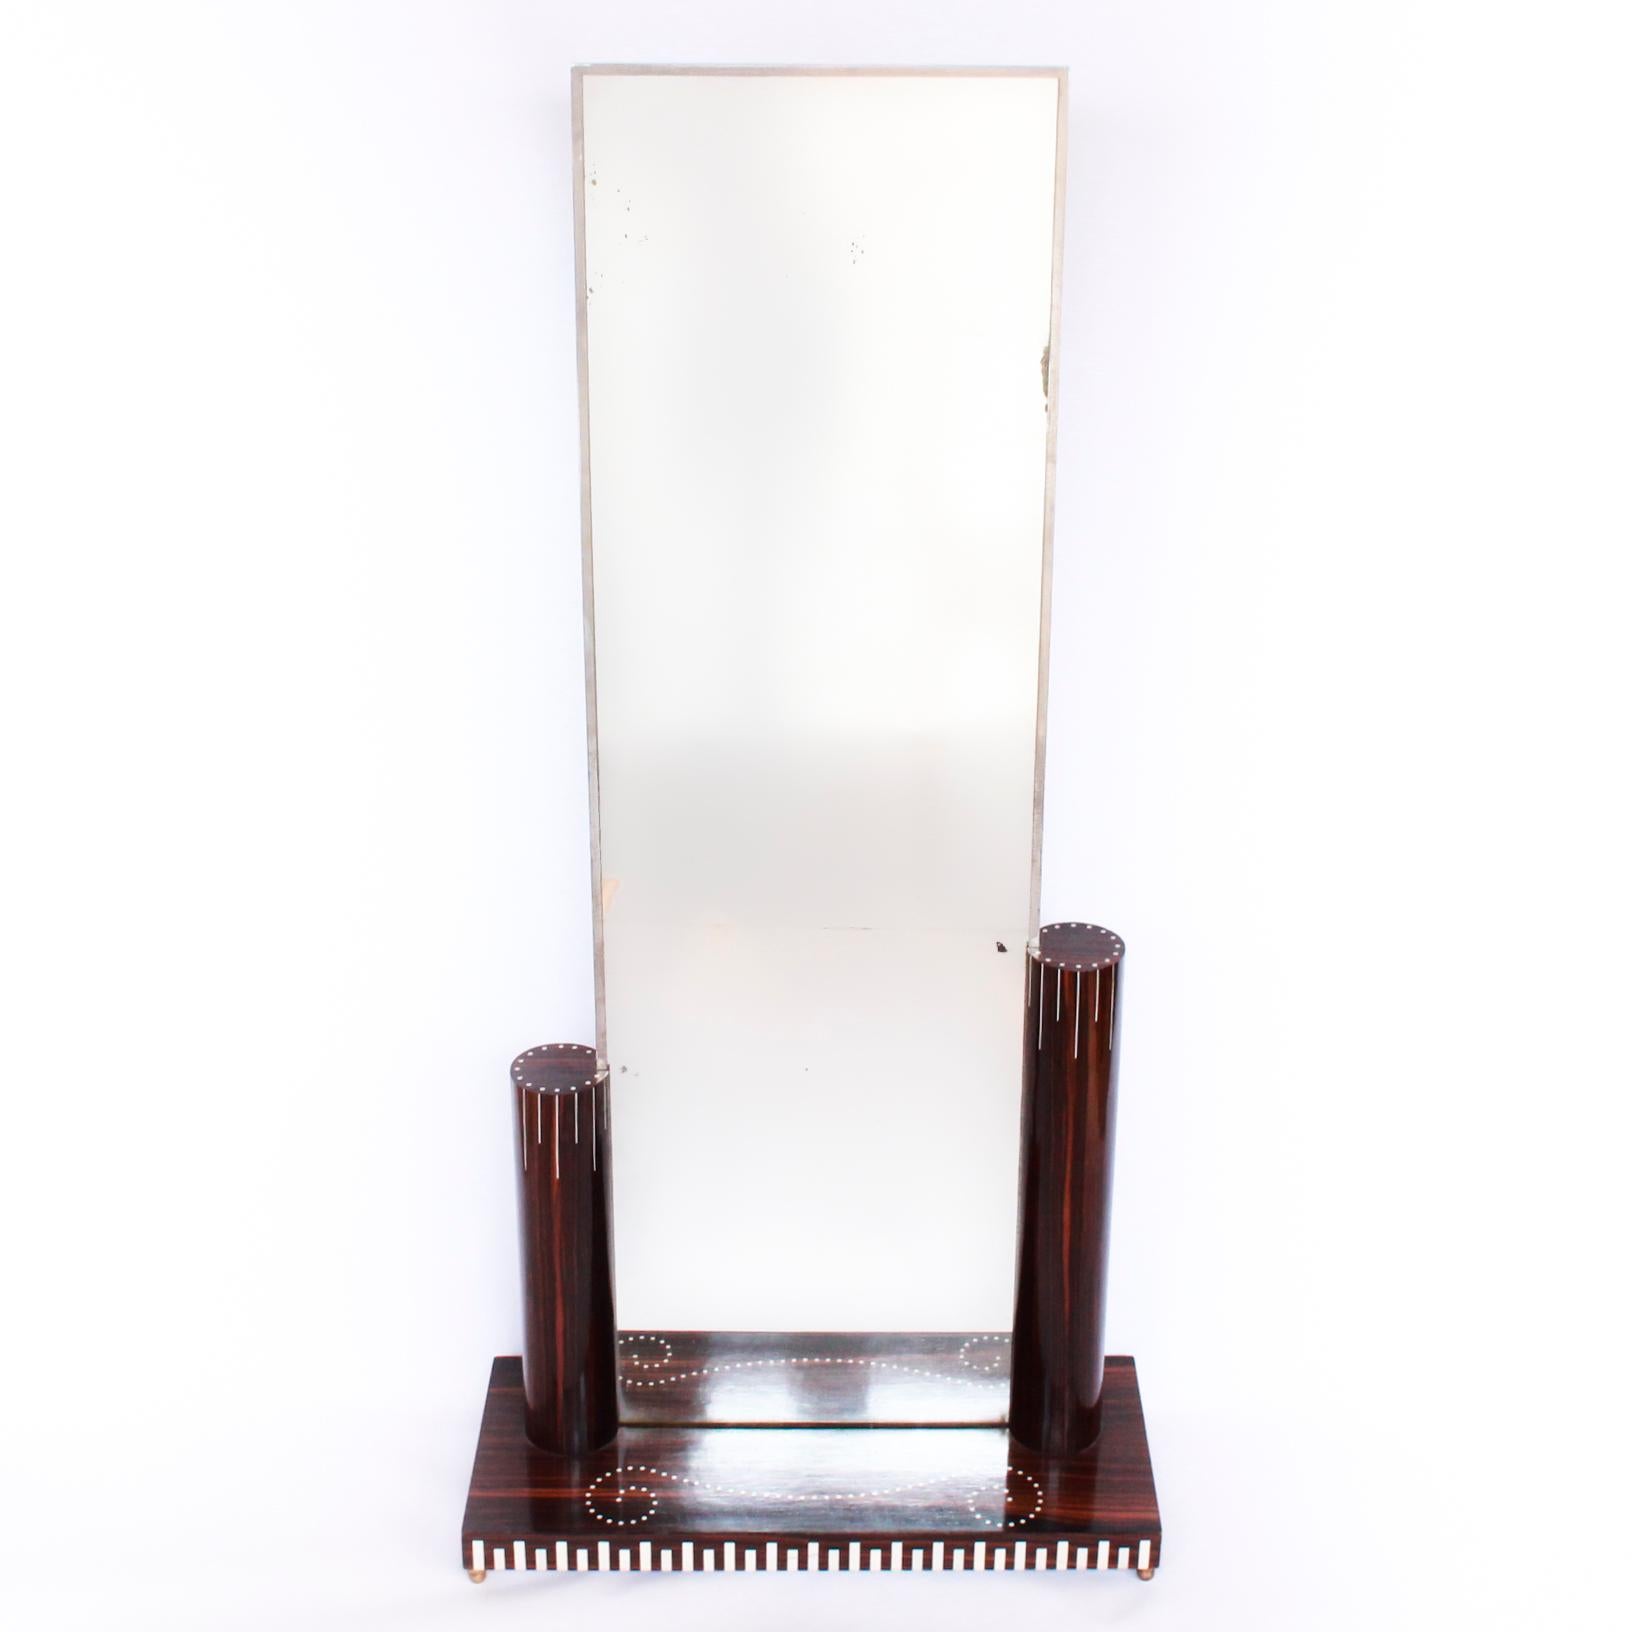 Free standing mirror after Émile-Jacques Ruhlmann. Mirror with metal frame, set into an asymmetric, pillared base of Macassar ebony veneer over oak. Ivory inlaid detail.

Origin: French,


